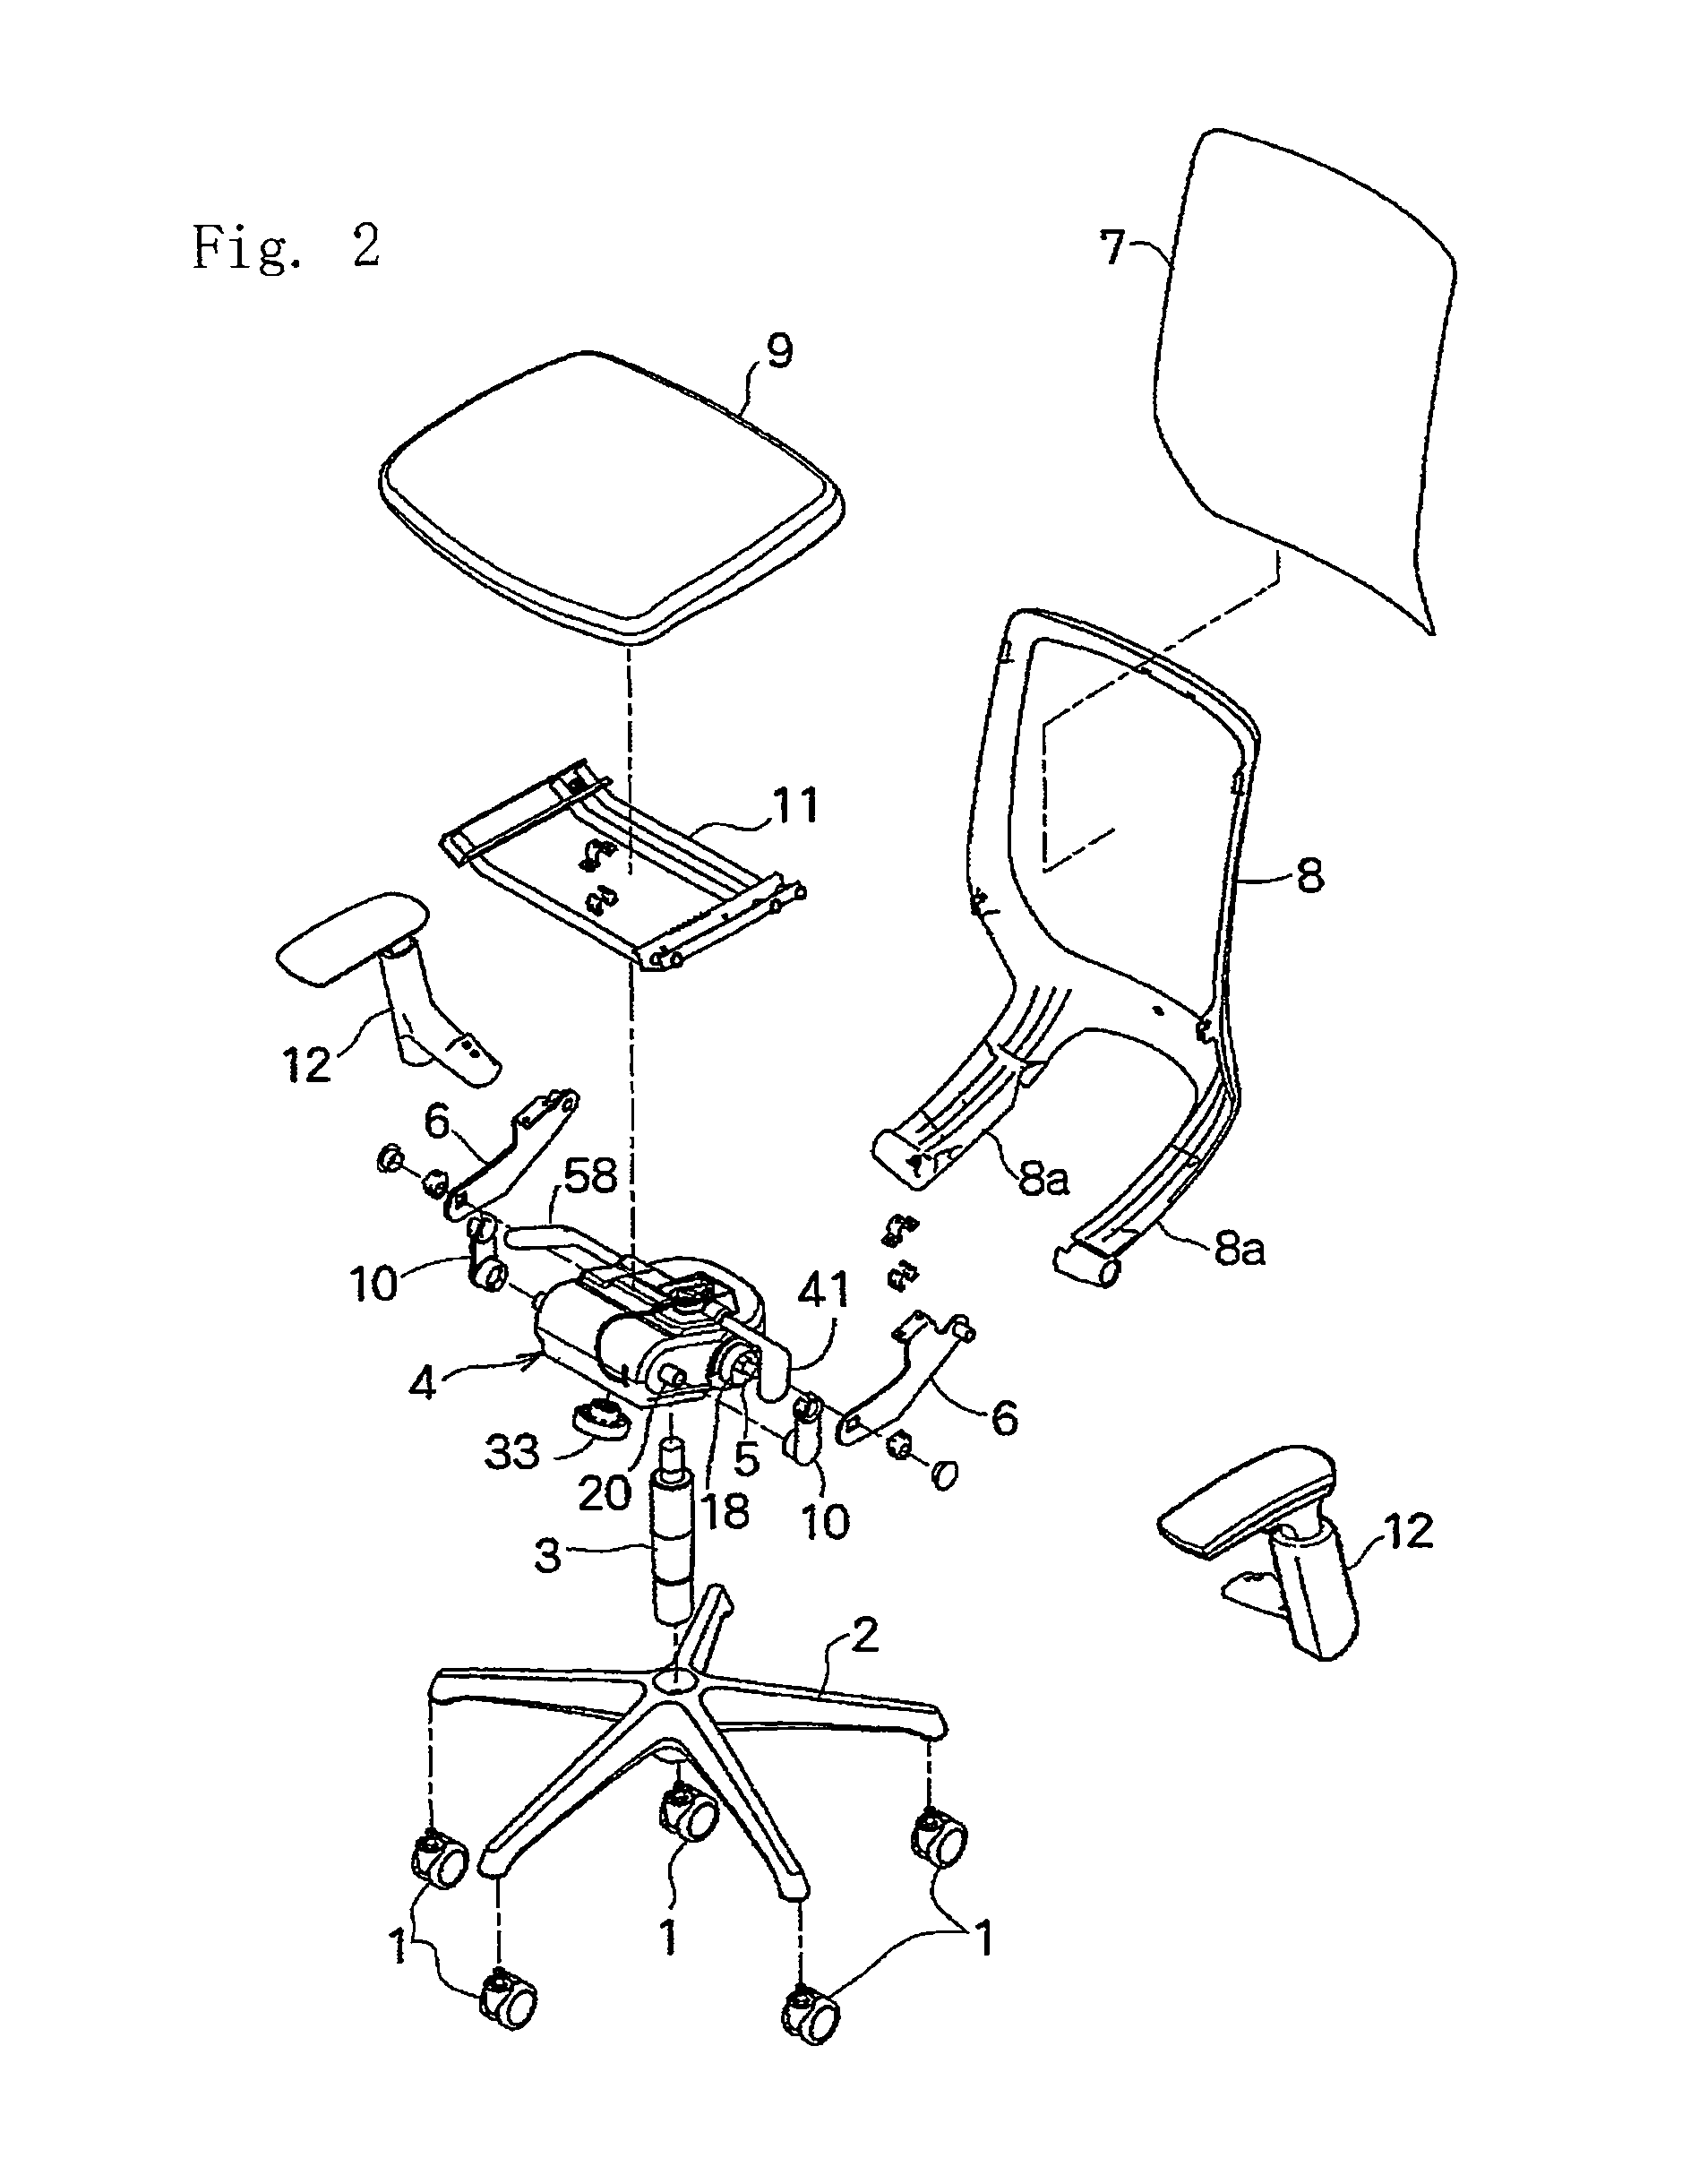 Locking device for a movable member in a chair